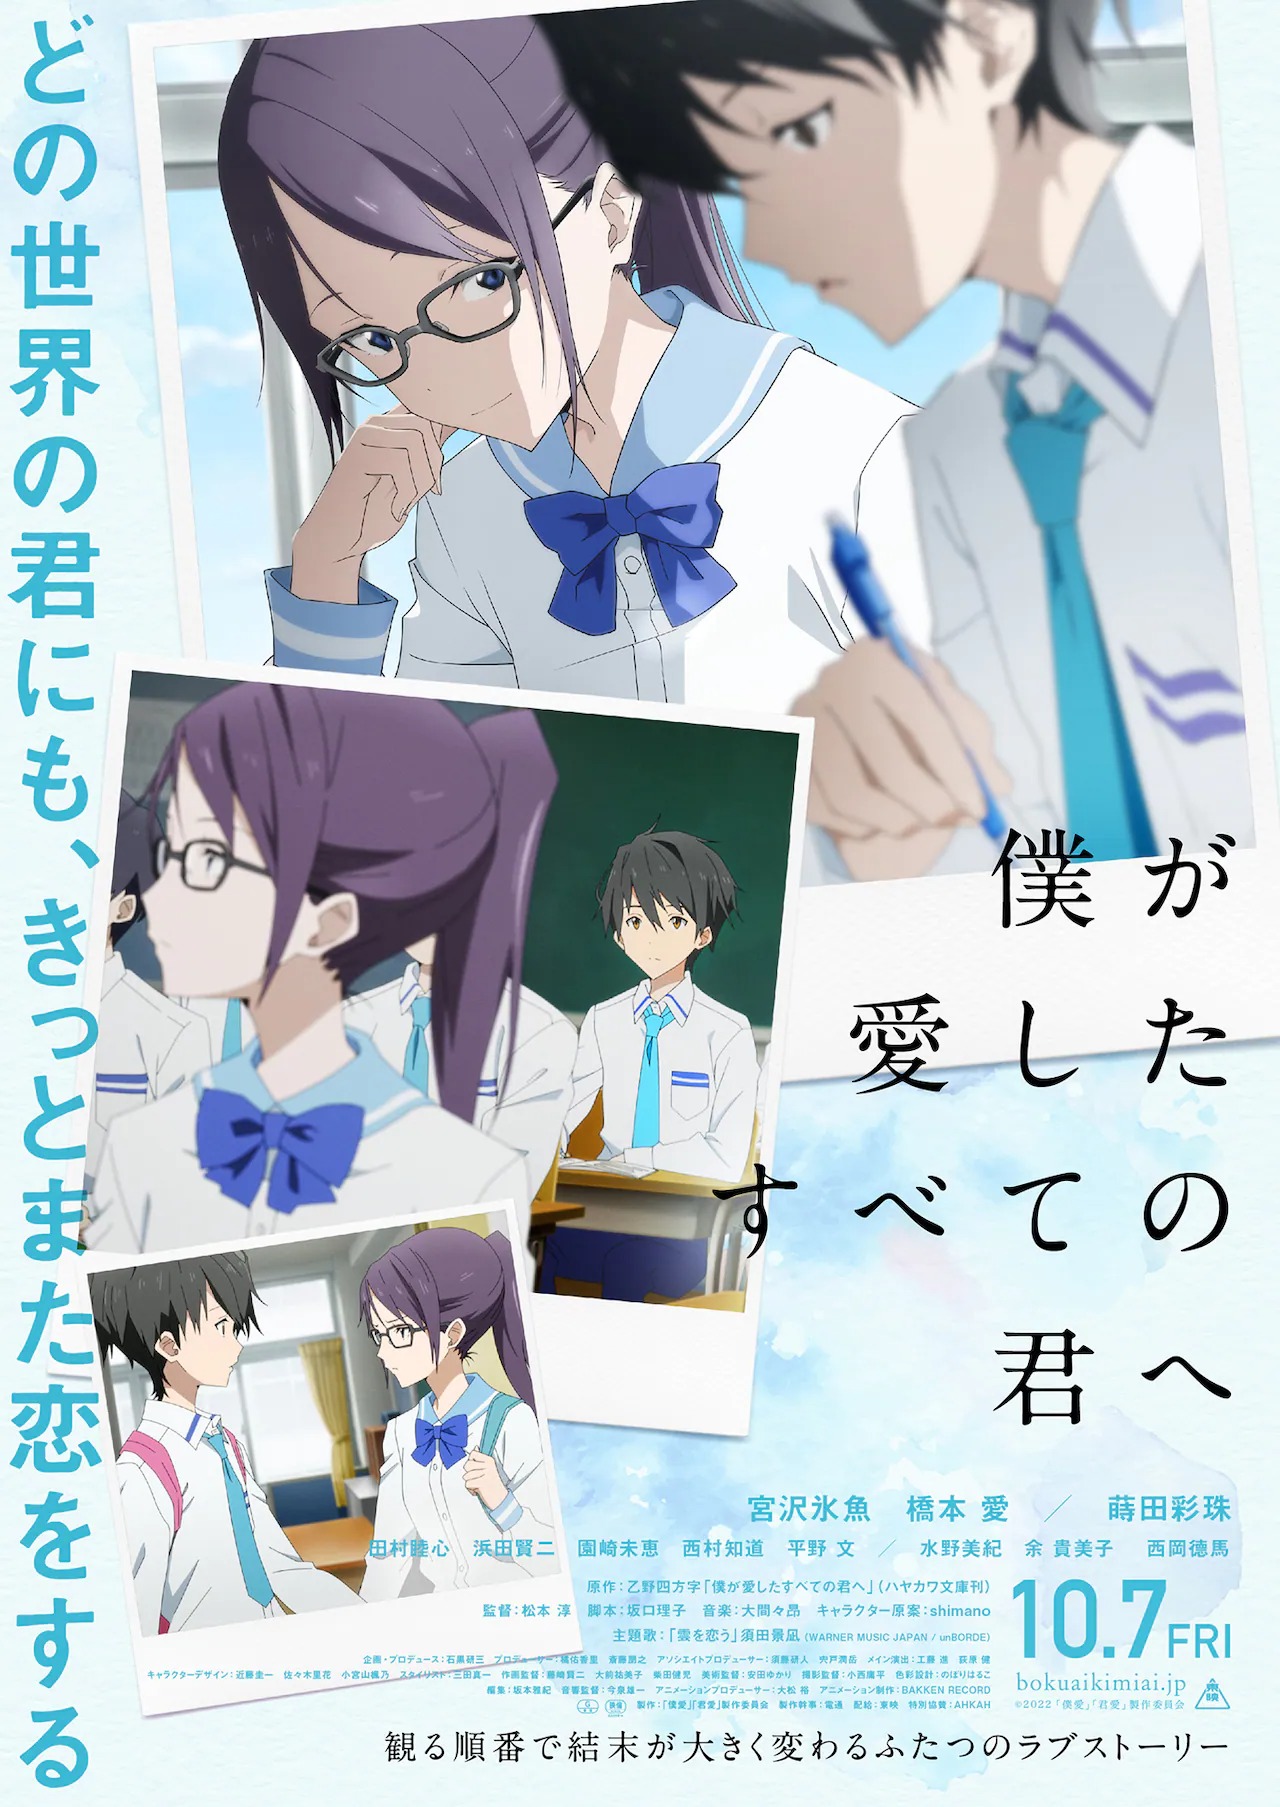 Crunchyroll - To Every You / To Me Anime Films Get Pair of Complementary  New Posters